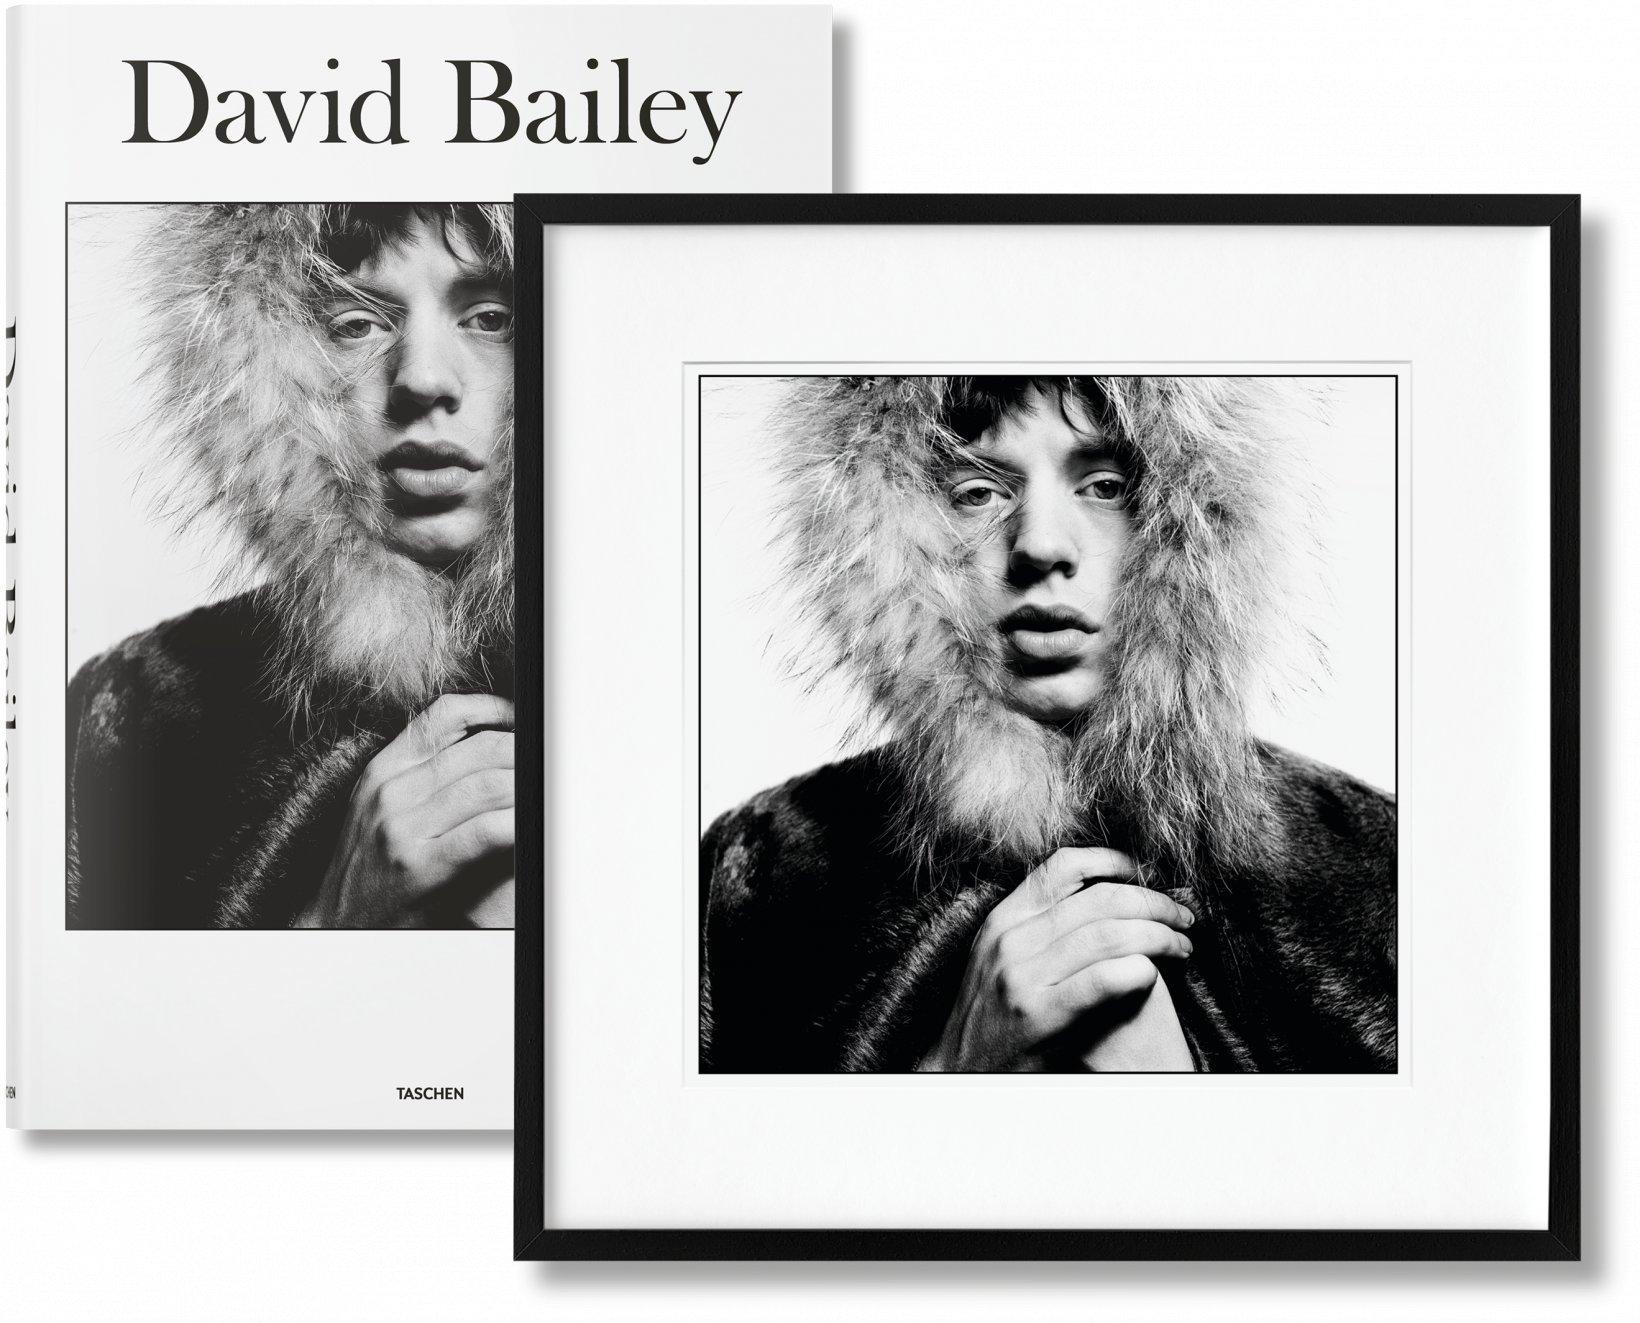 Art Edition (No. 151–225), with the print Mick Jagger, 1964. The book and print are both numbered and signed by David Bailey, accompanied by a bookstand designed by Marc Newson and a set of four book jackets featuring John Lennon and Paul McCartney,